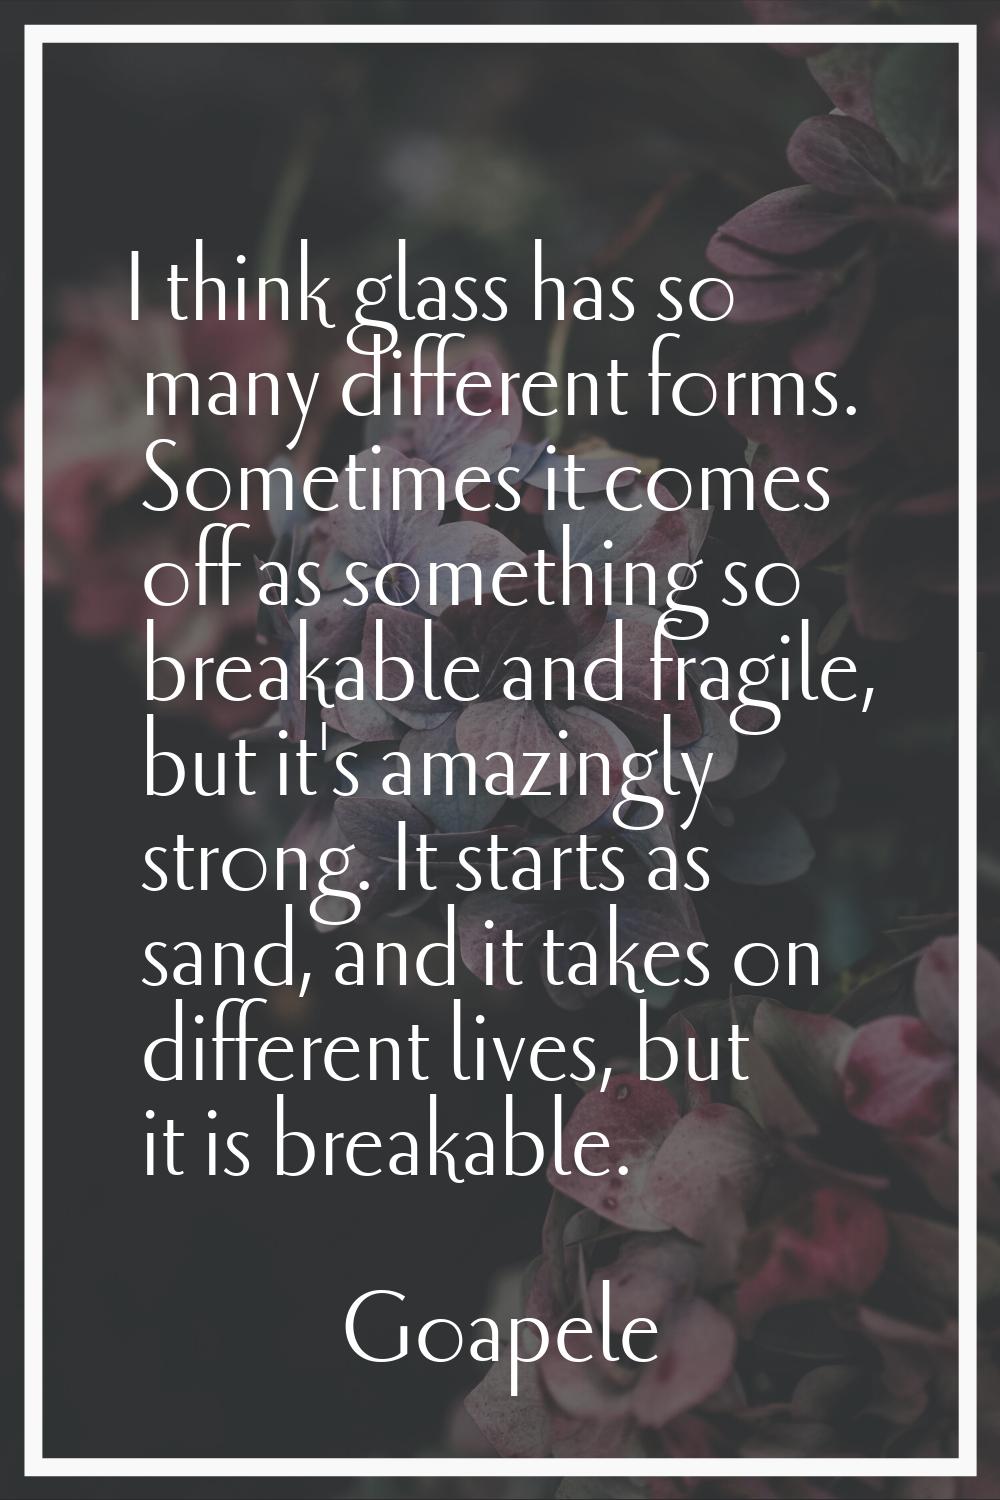 I think glass has so many different forms. Sometimes it comes off as something so breakable and fra